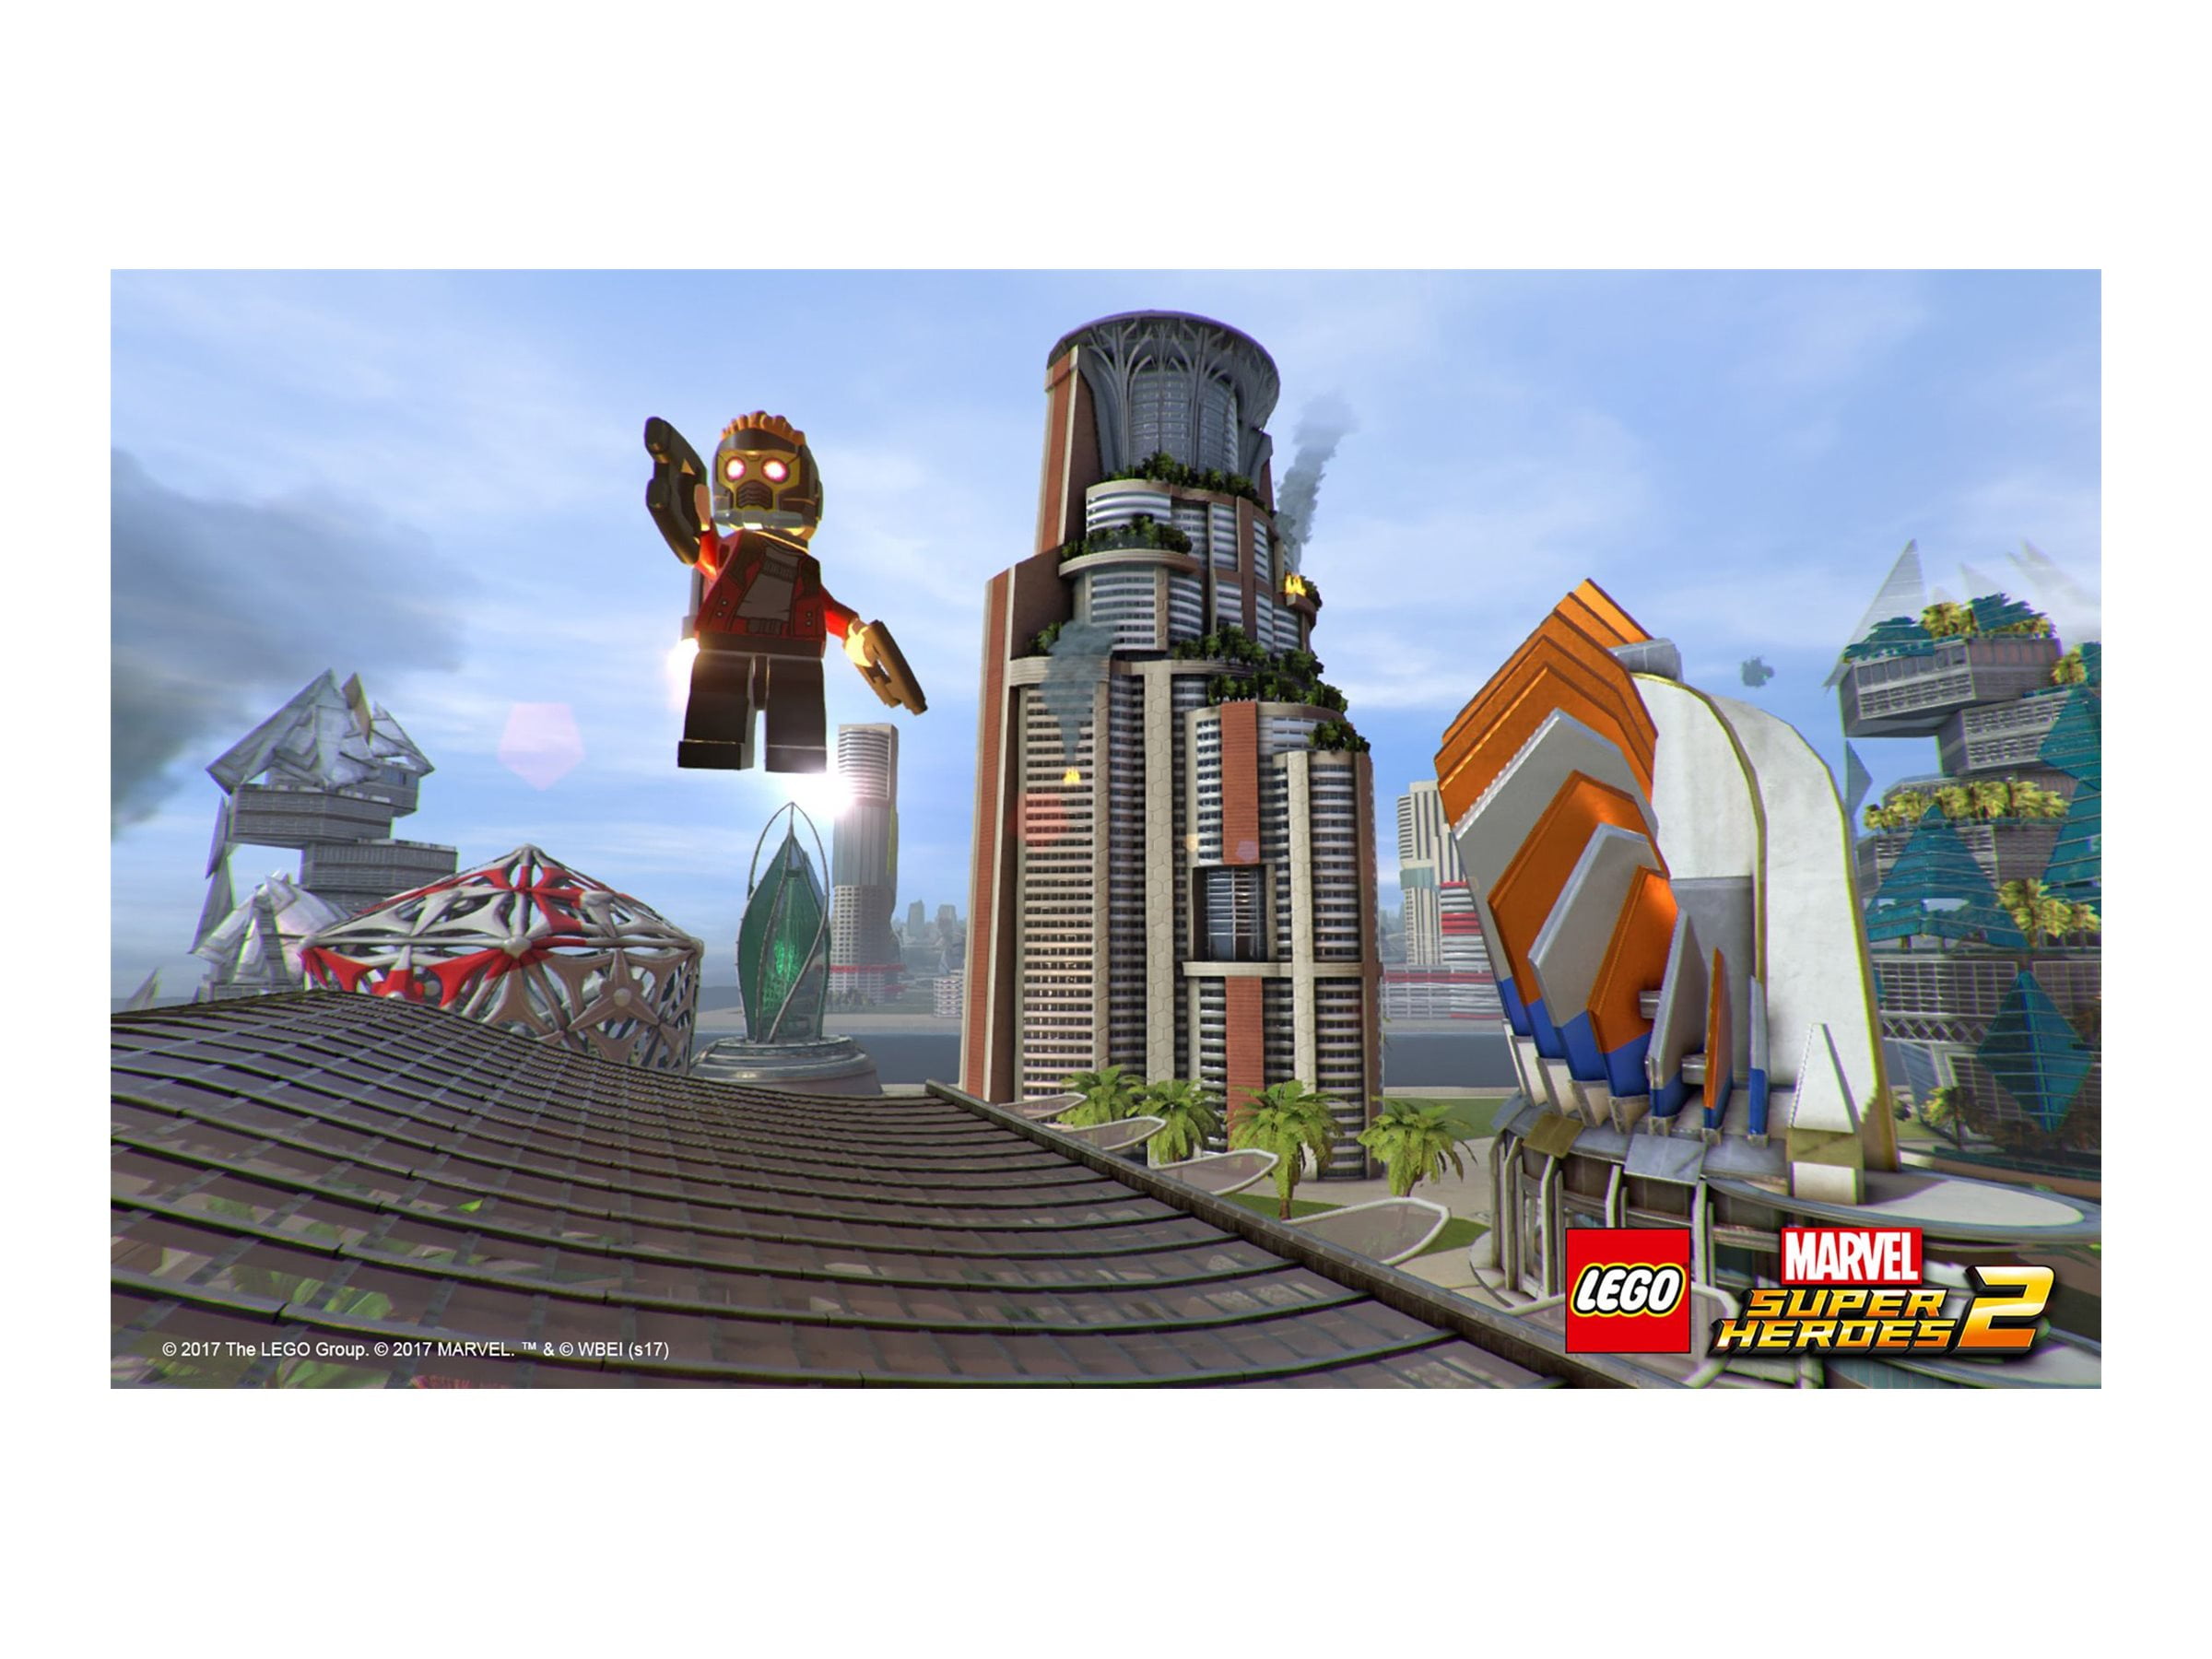 LEGO Marvel Collection (PS4) 